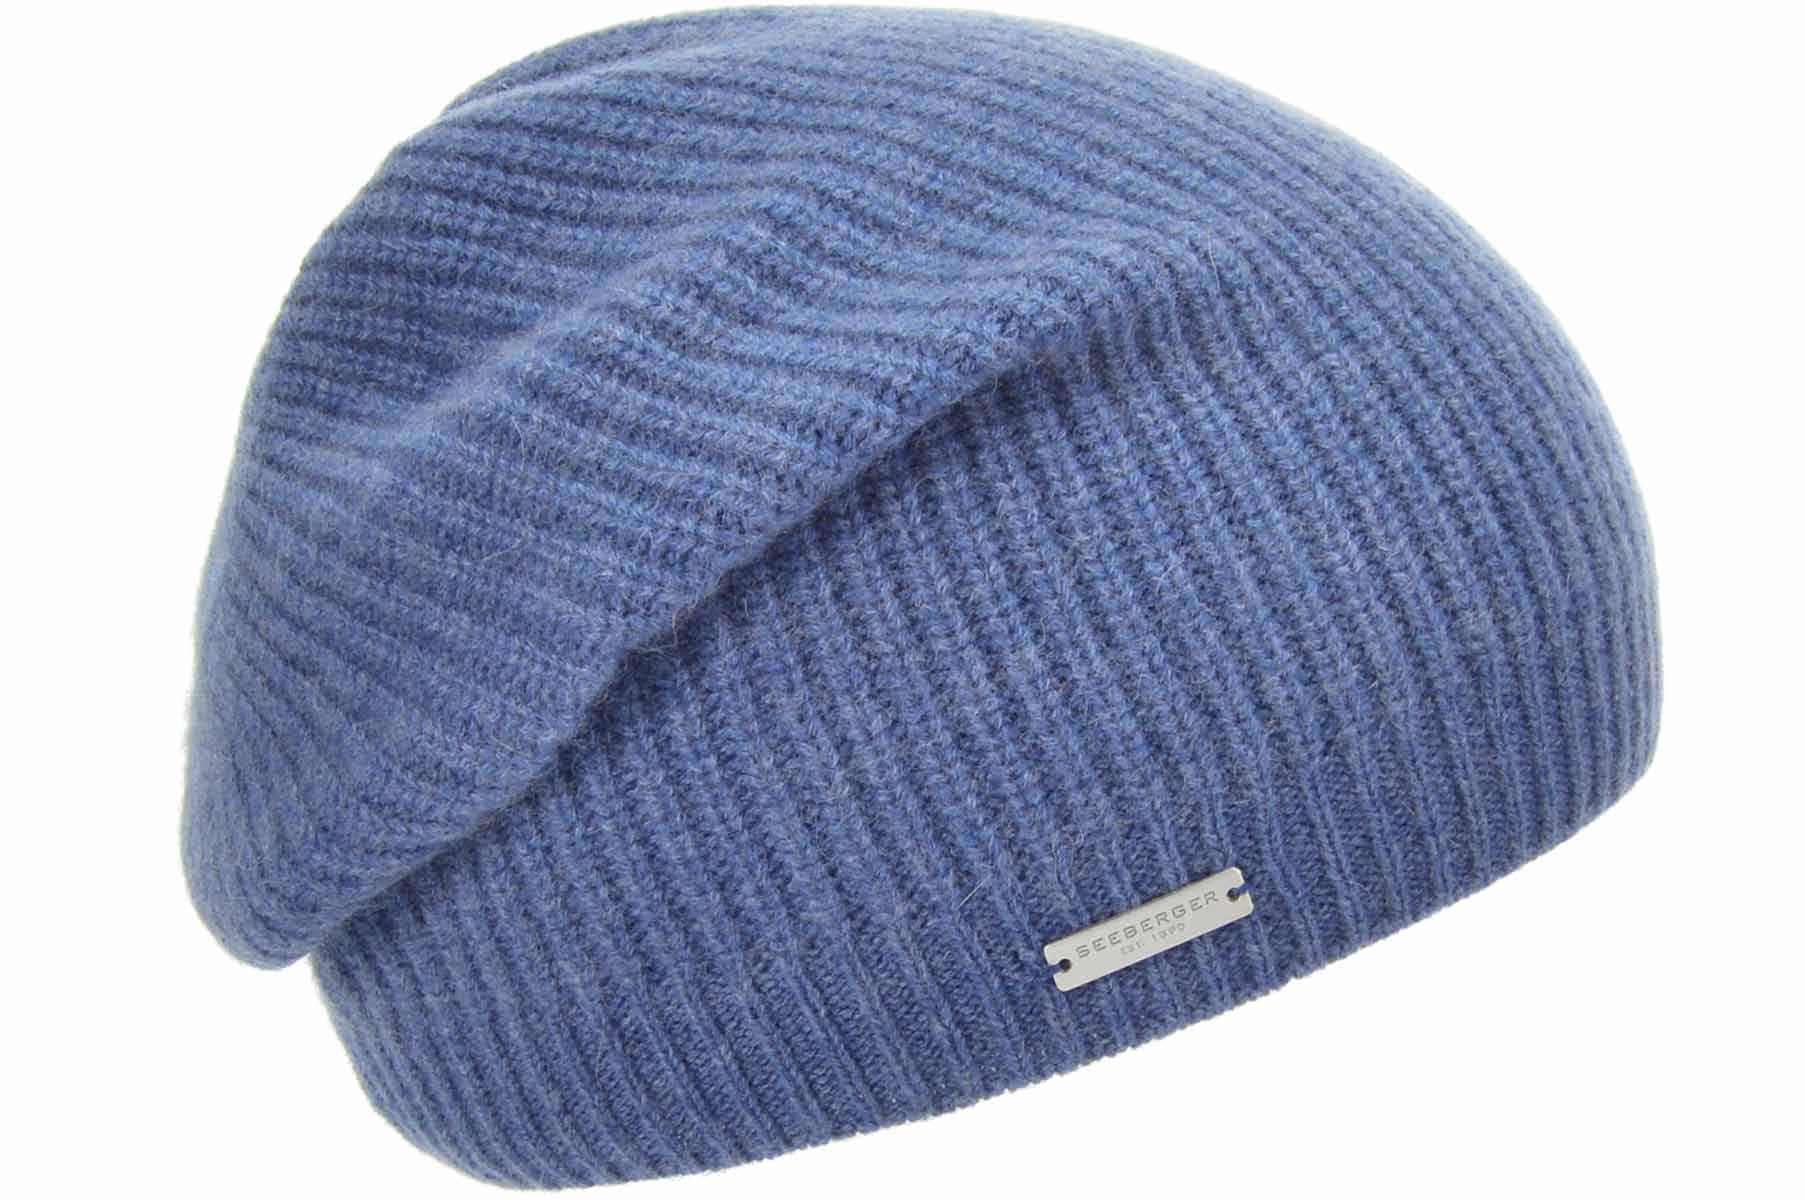 Picture for category Winter hats